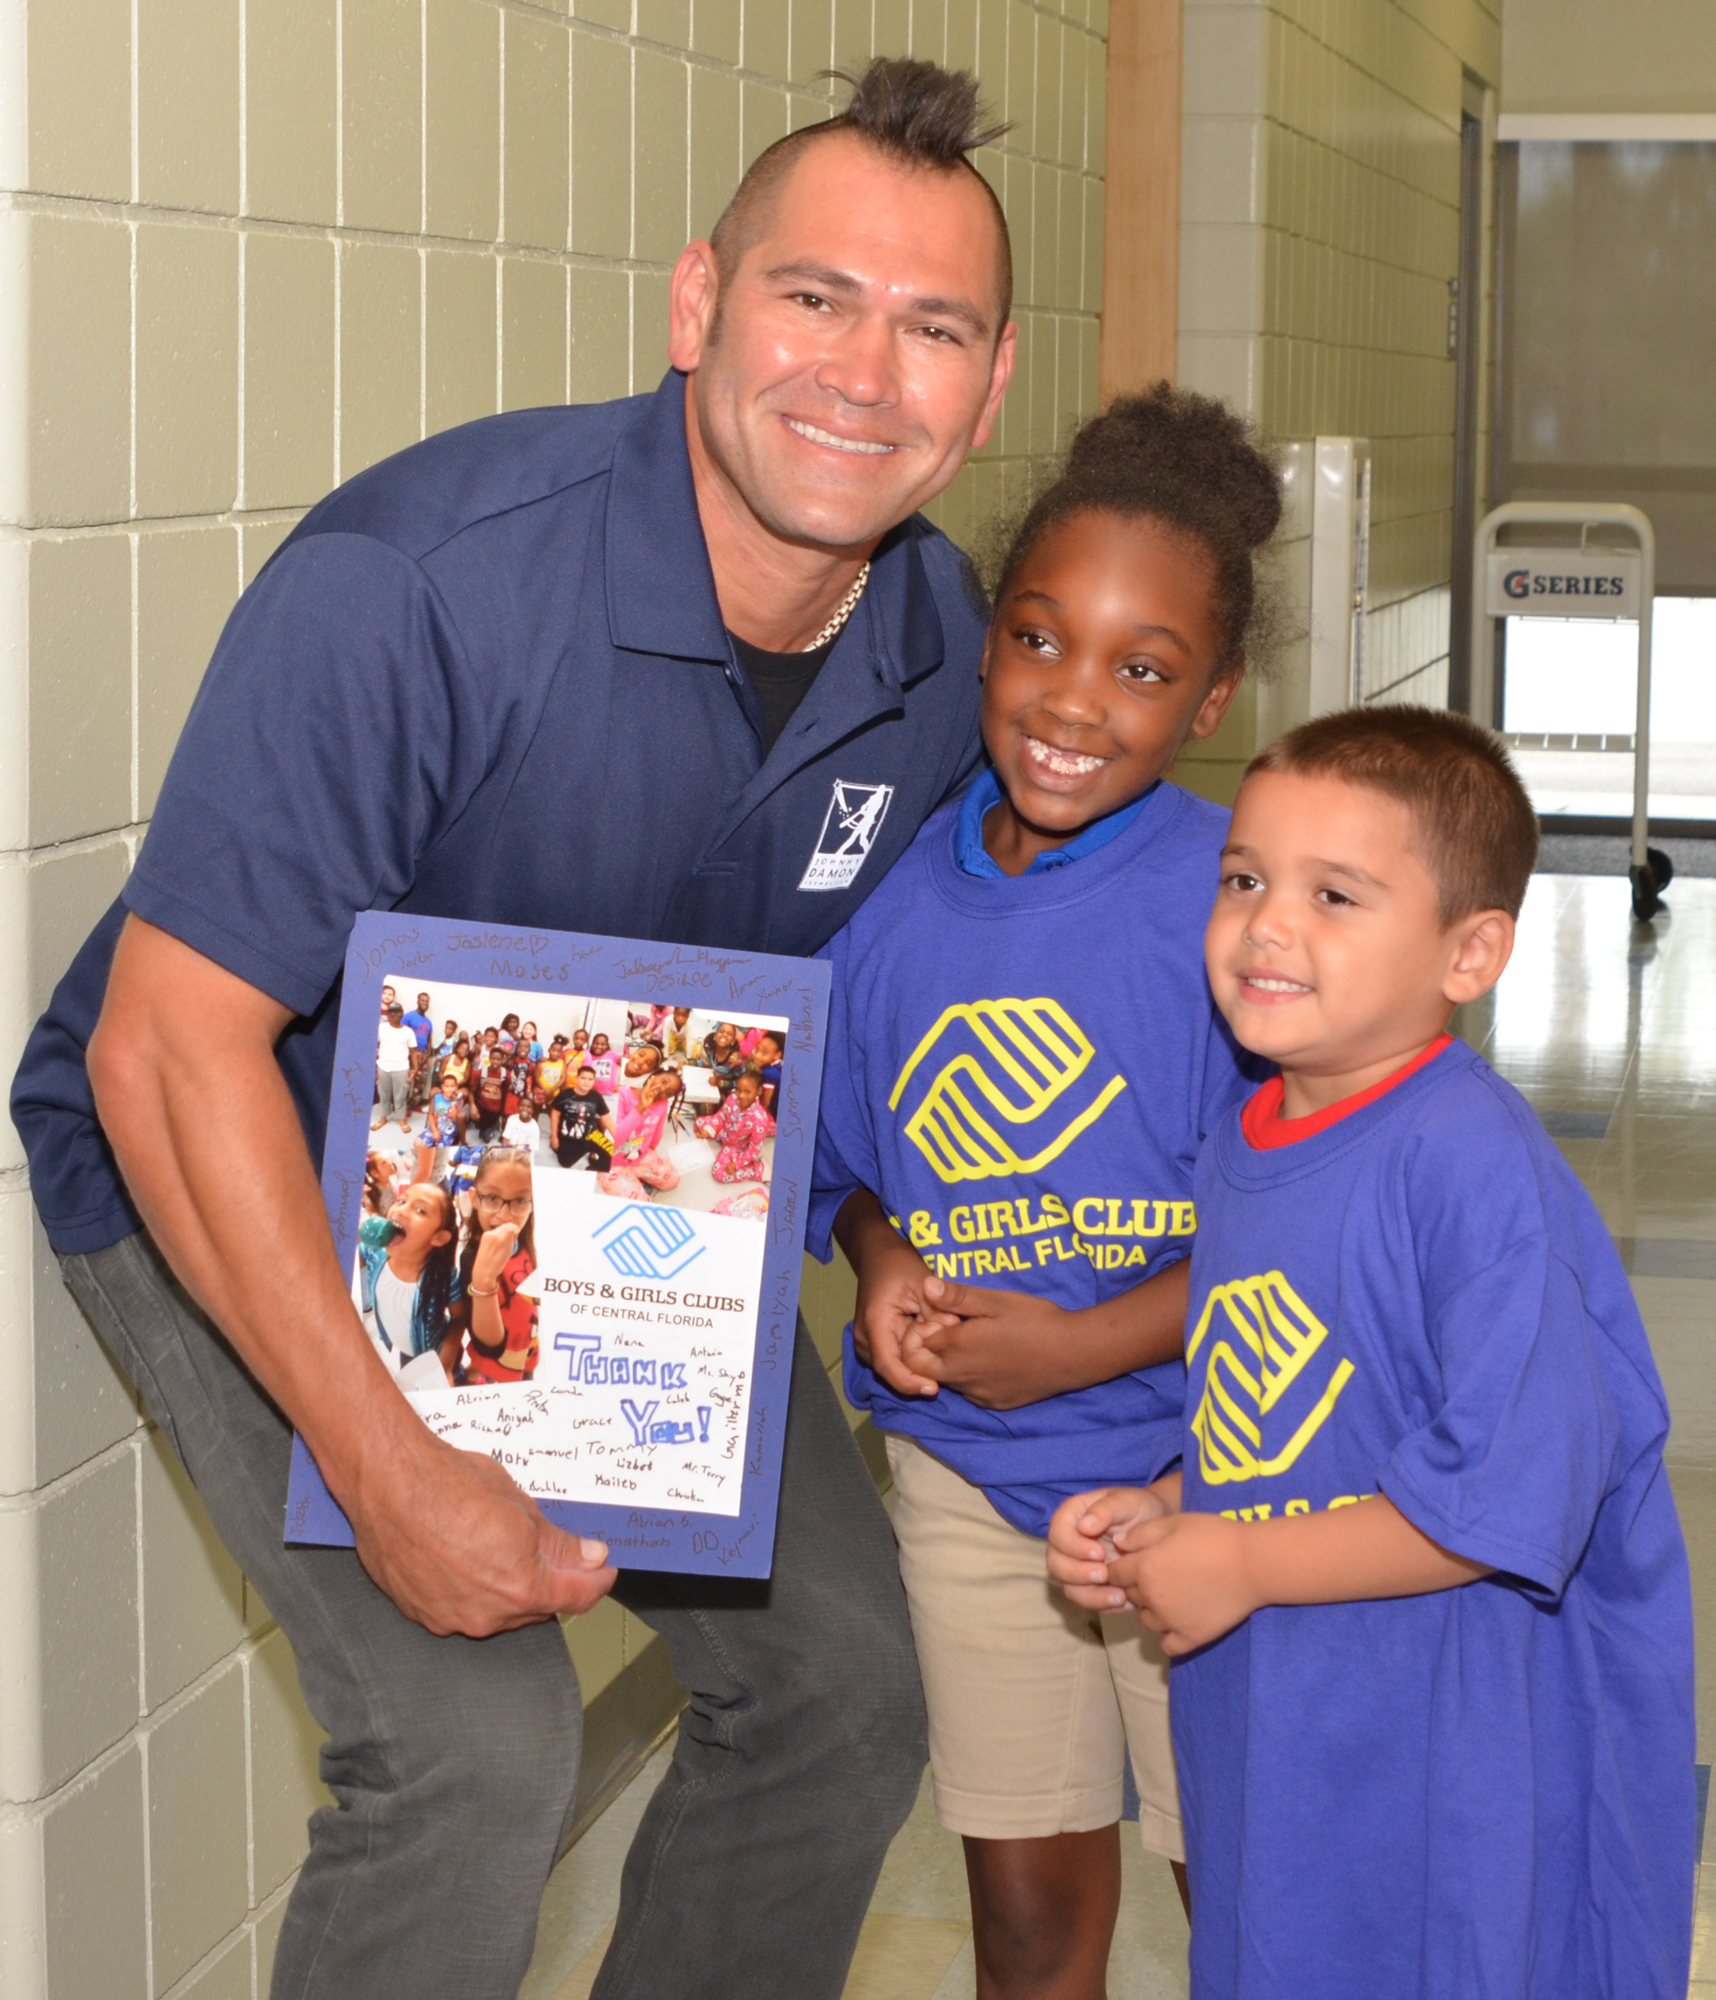 Children in the Boys & Girls Club present a thank-you card to Johnny Damon.